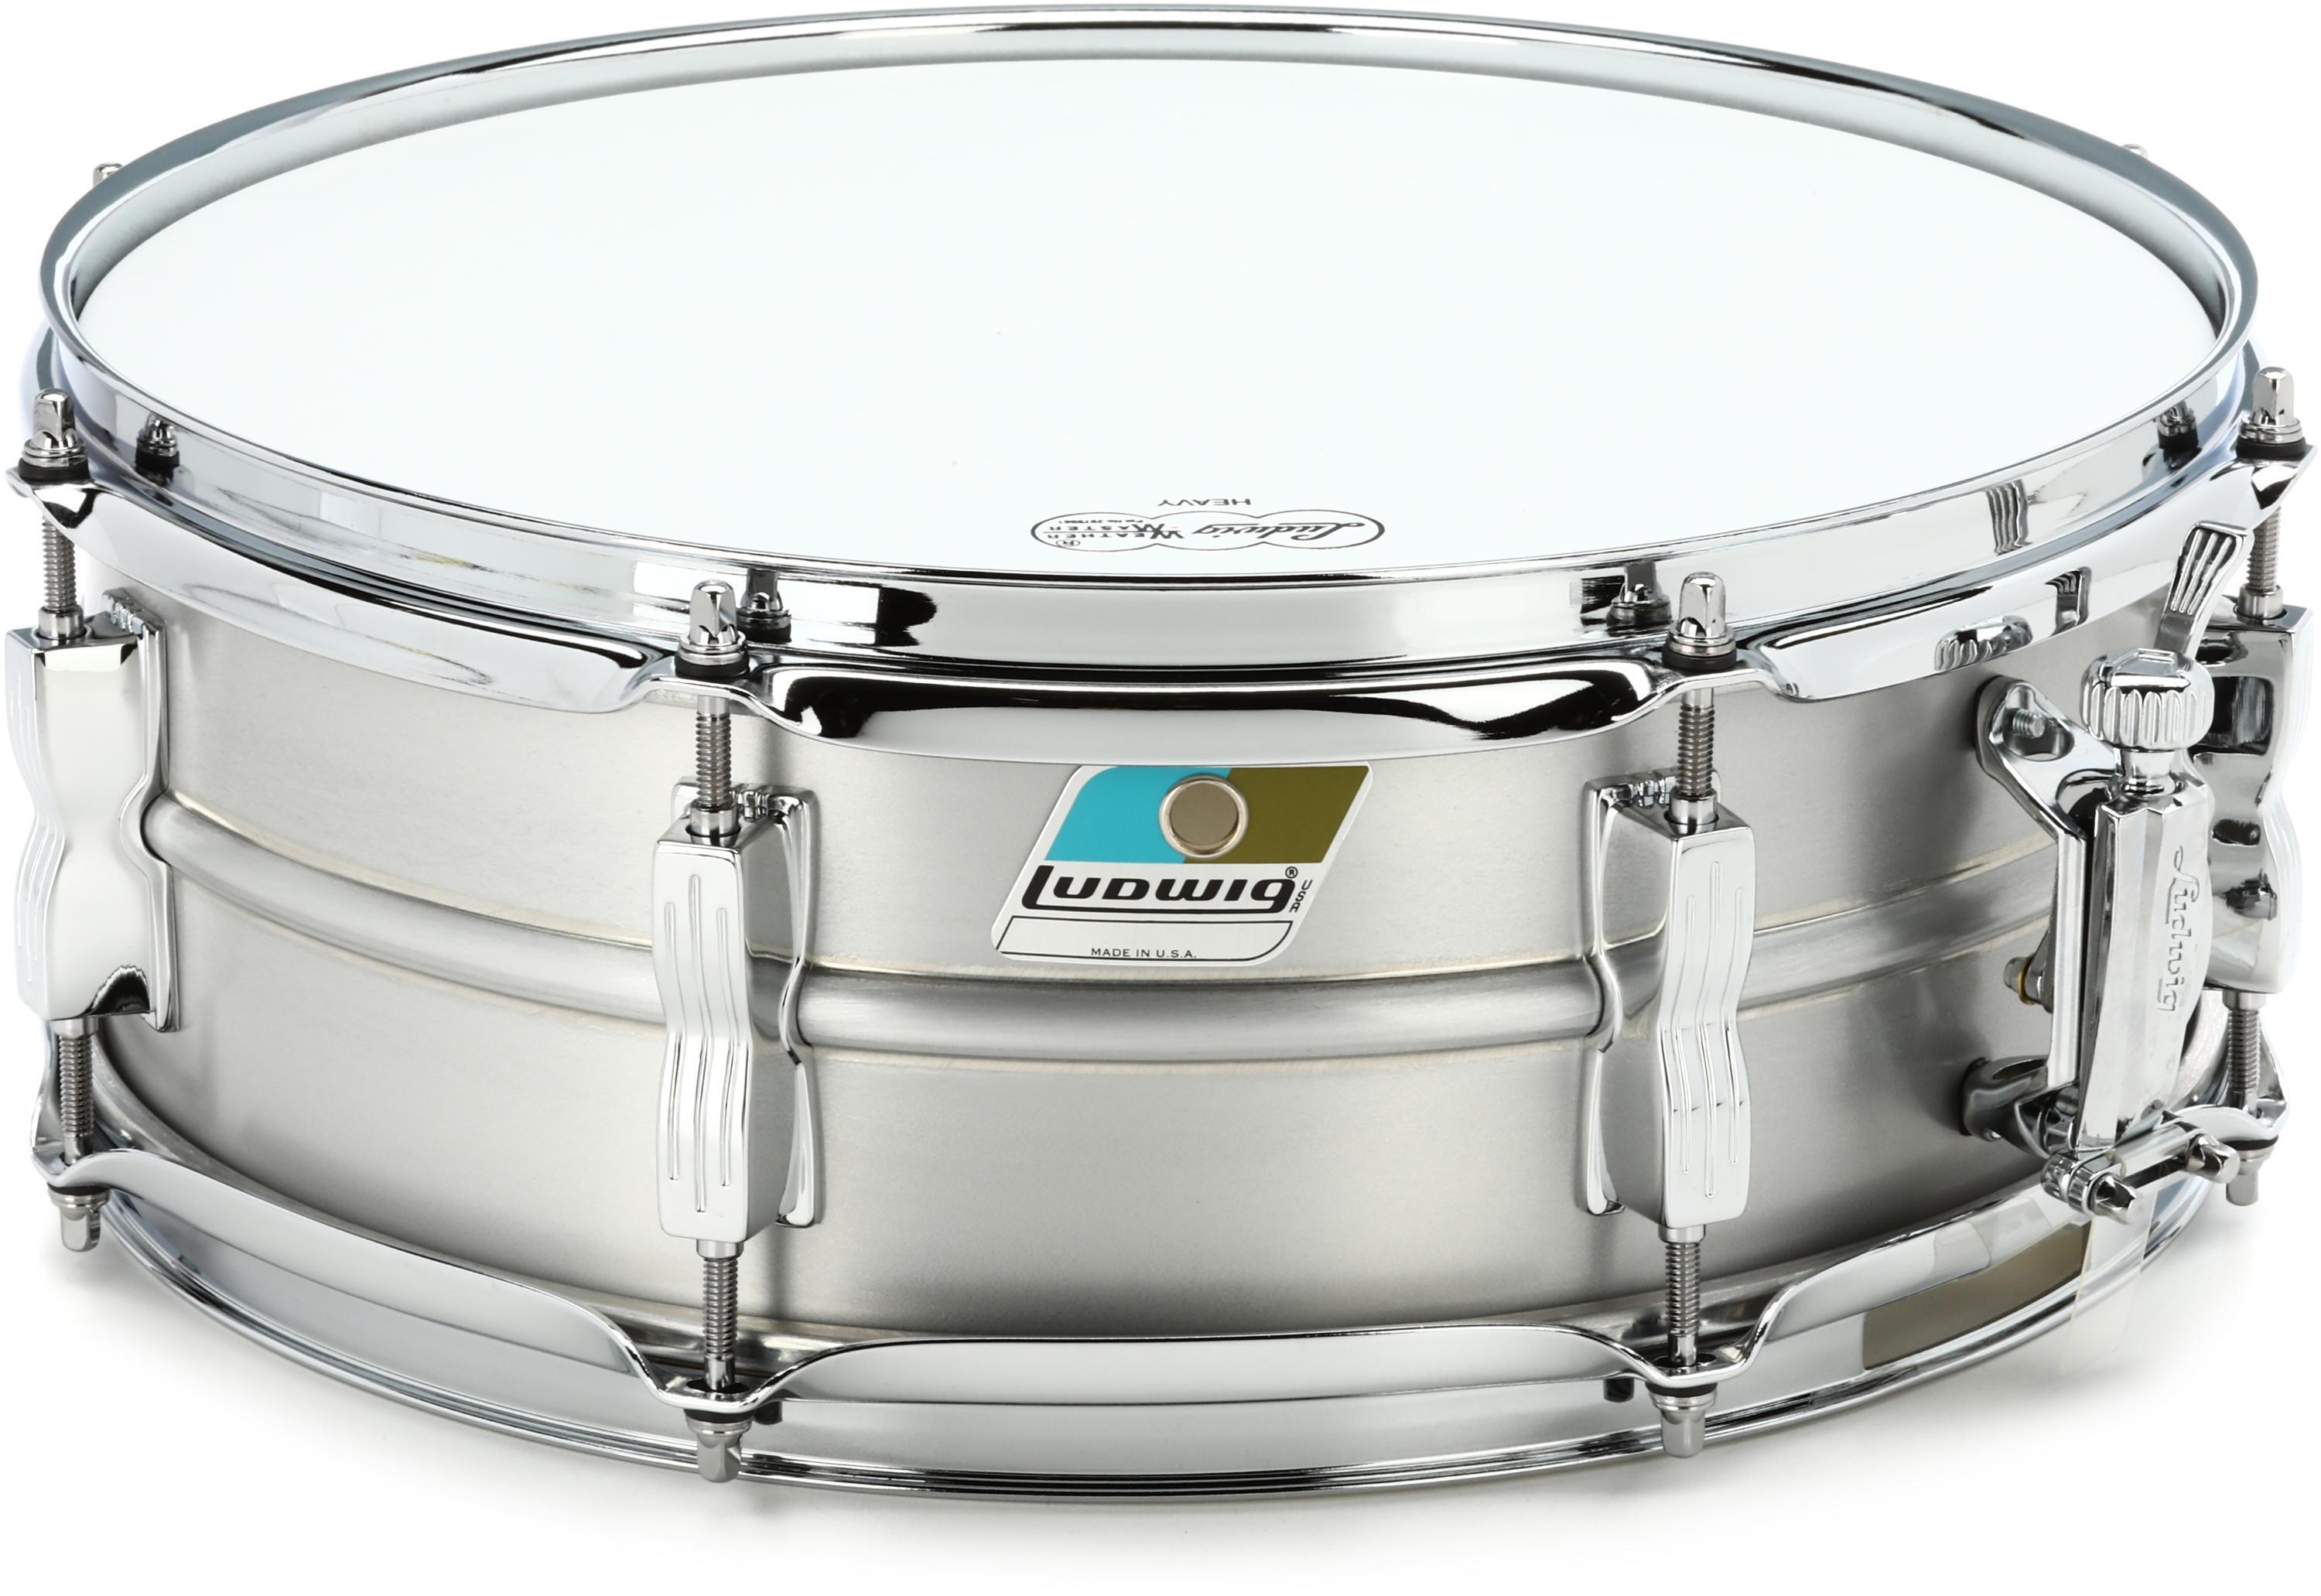 Ludwig Acrolite Snare Drum - 5 x 14 inch Reviews | Sweetwater